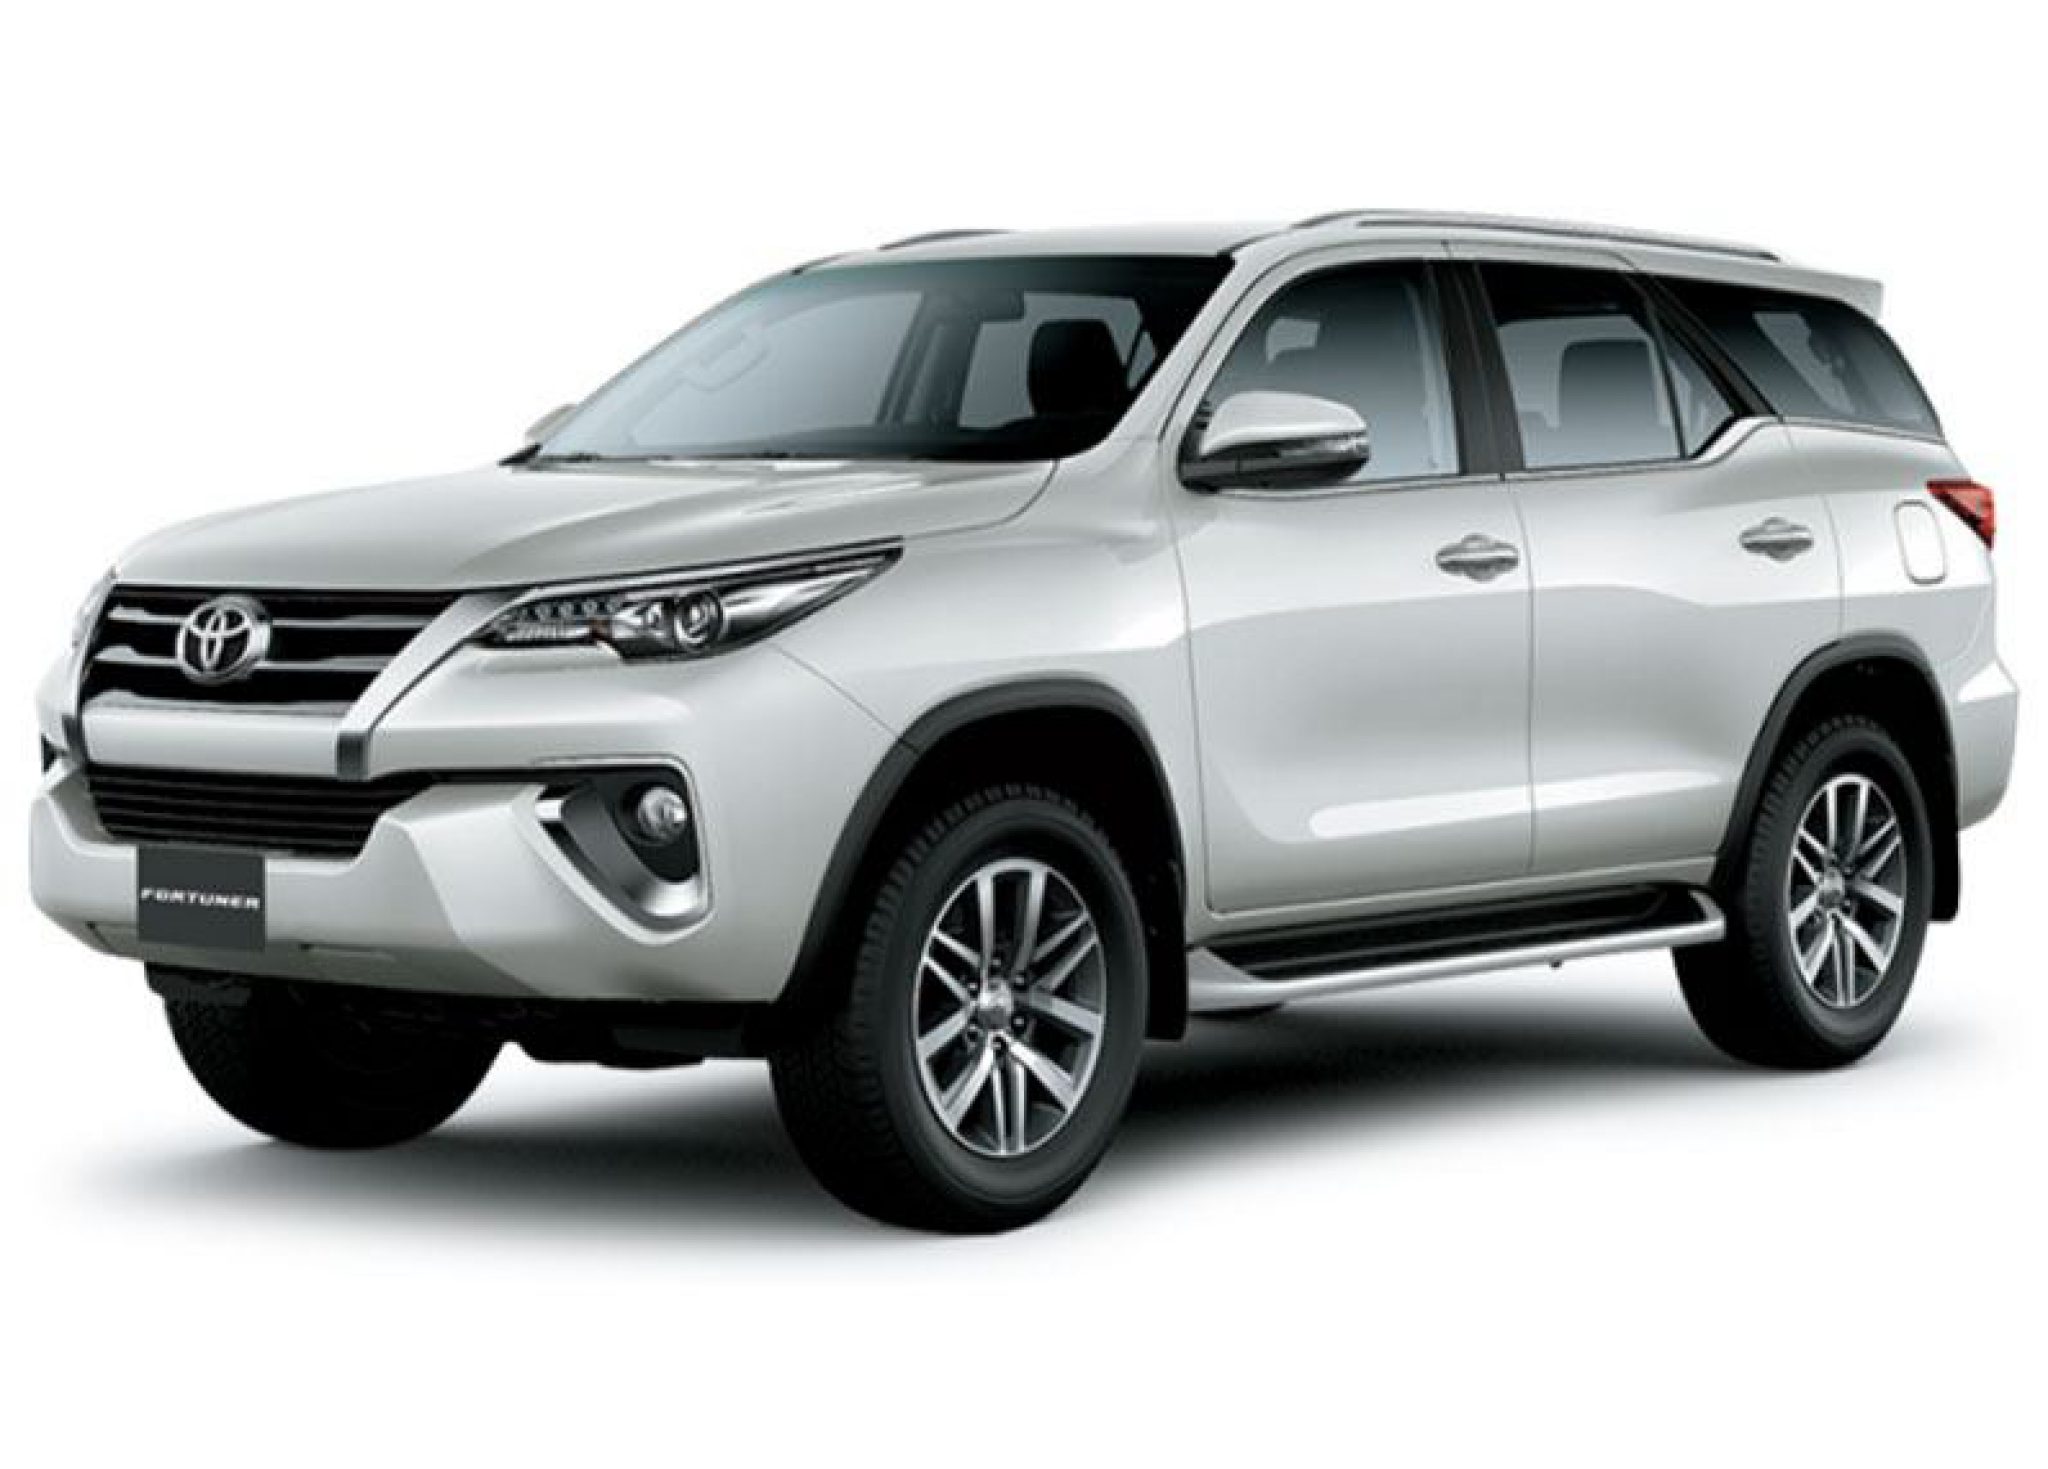 List Of All Toyota Suvs In The Philippines Price List With Brief Review